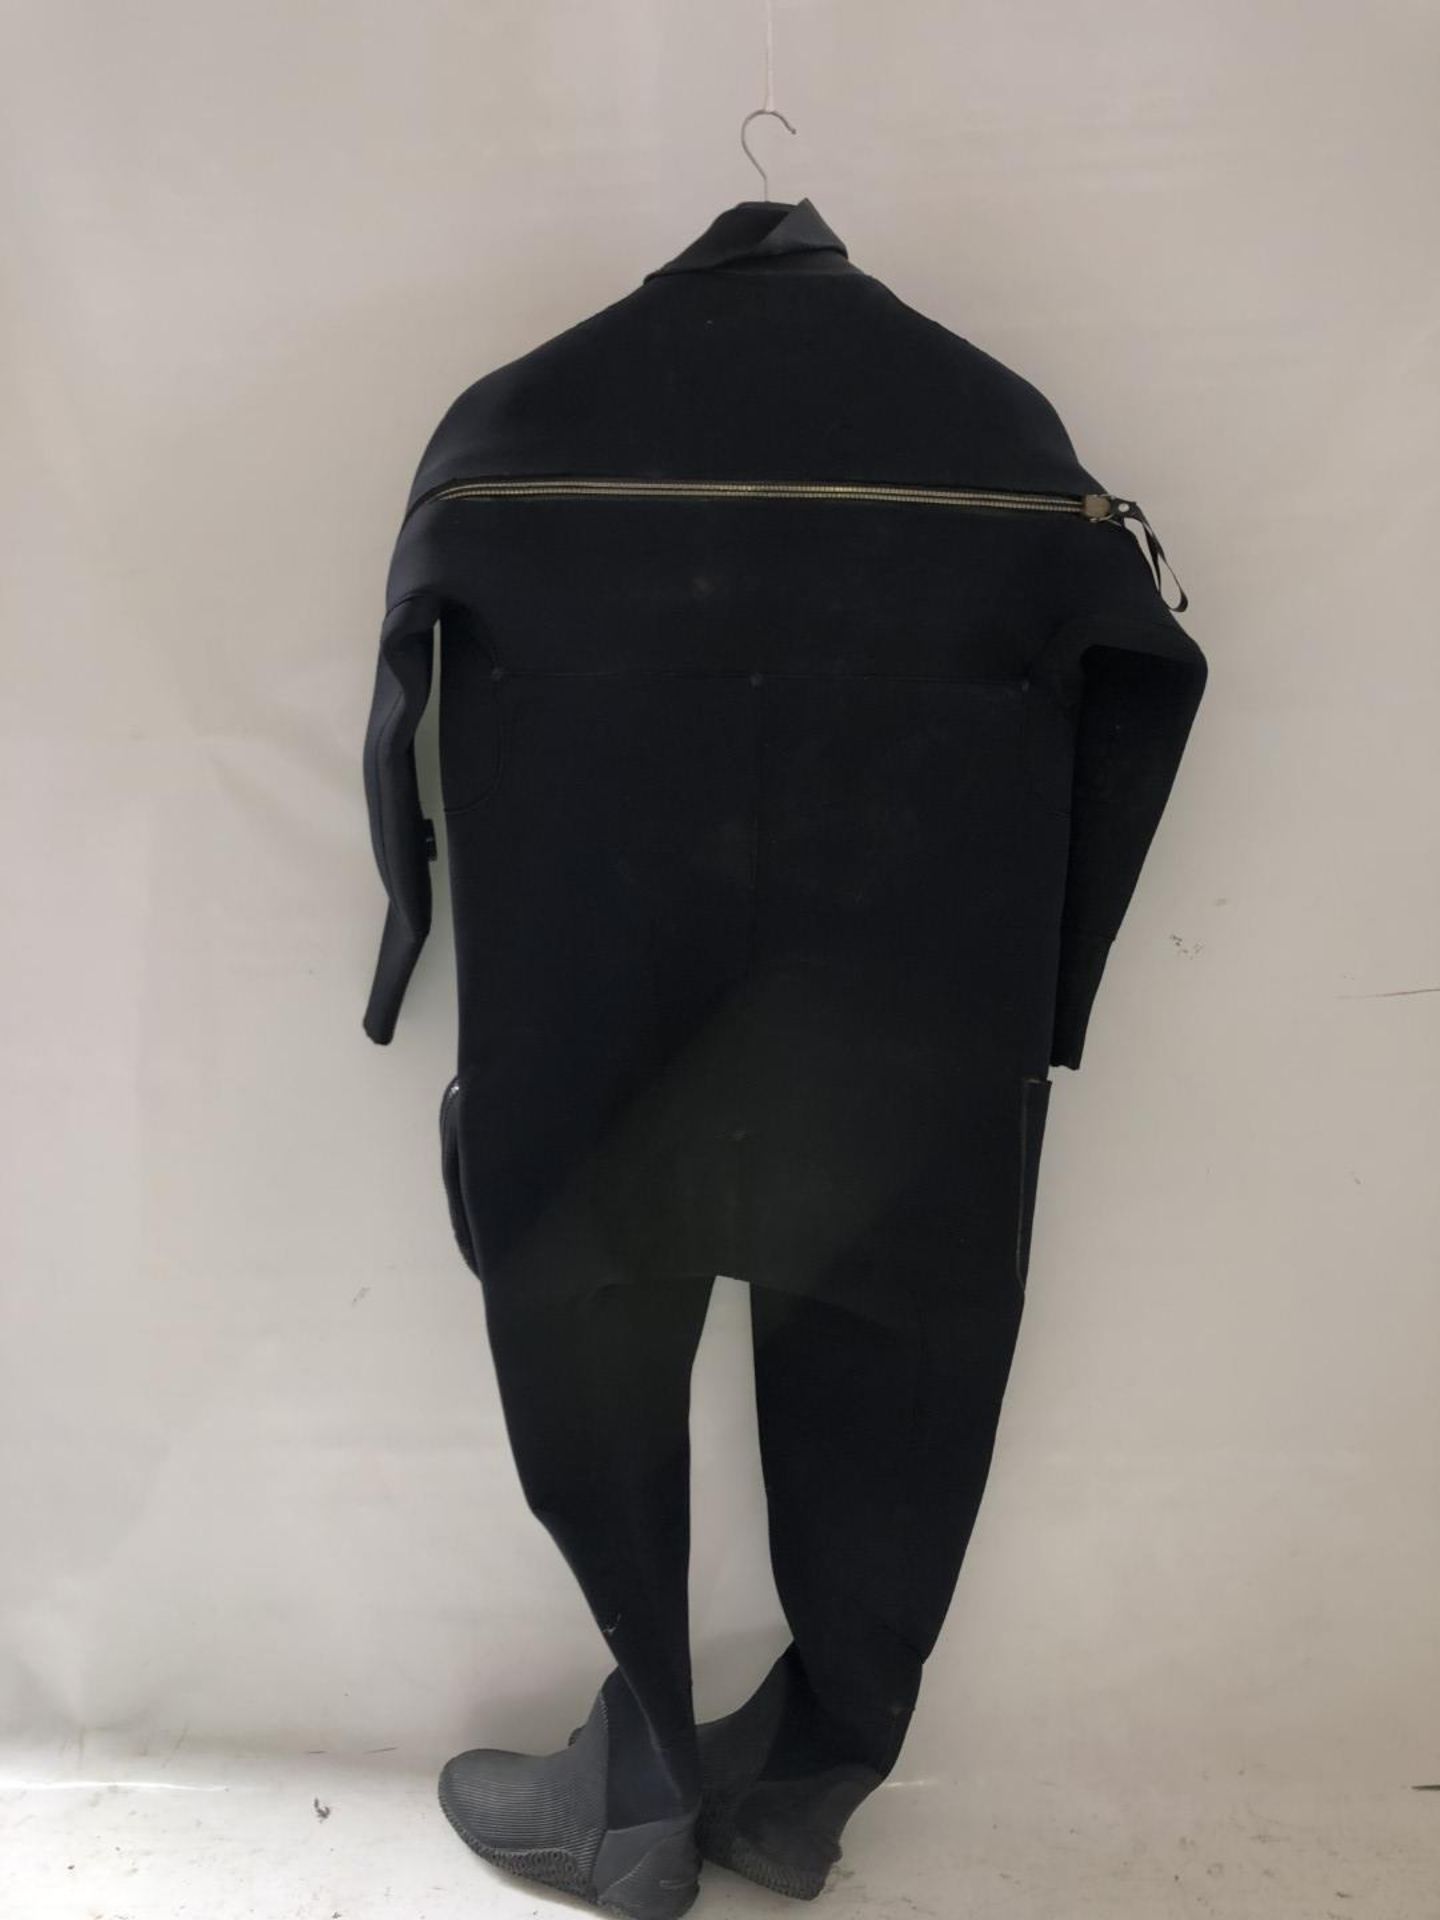 1 x Used Black Wet Suit - Size XL - Ref: NS364 - CL349 - Altrincham WA14 - Image 8 of 9